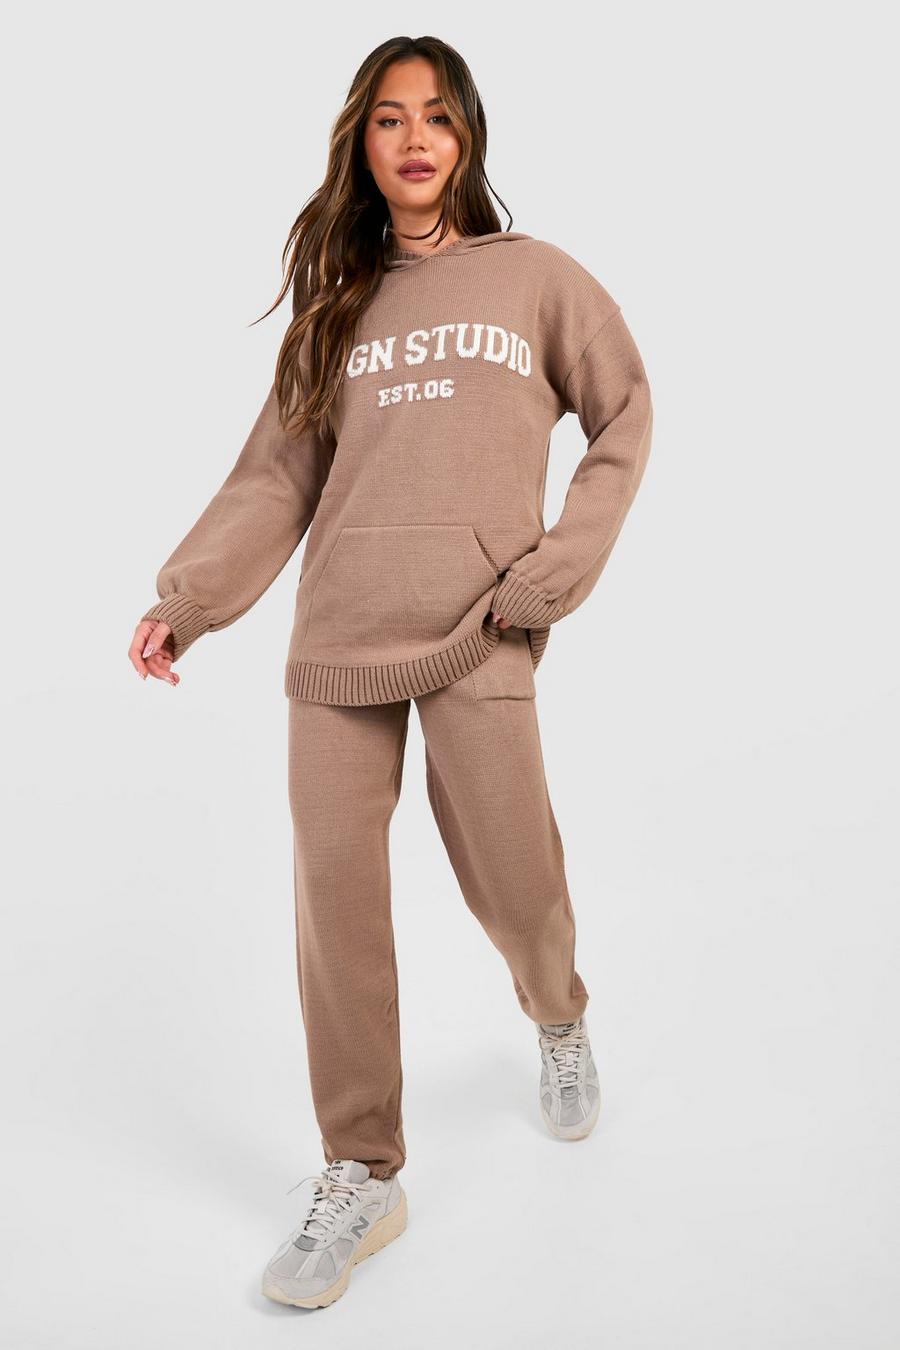 Taupe Dsgn Studio Oversized Hoody And Jogger Set